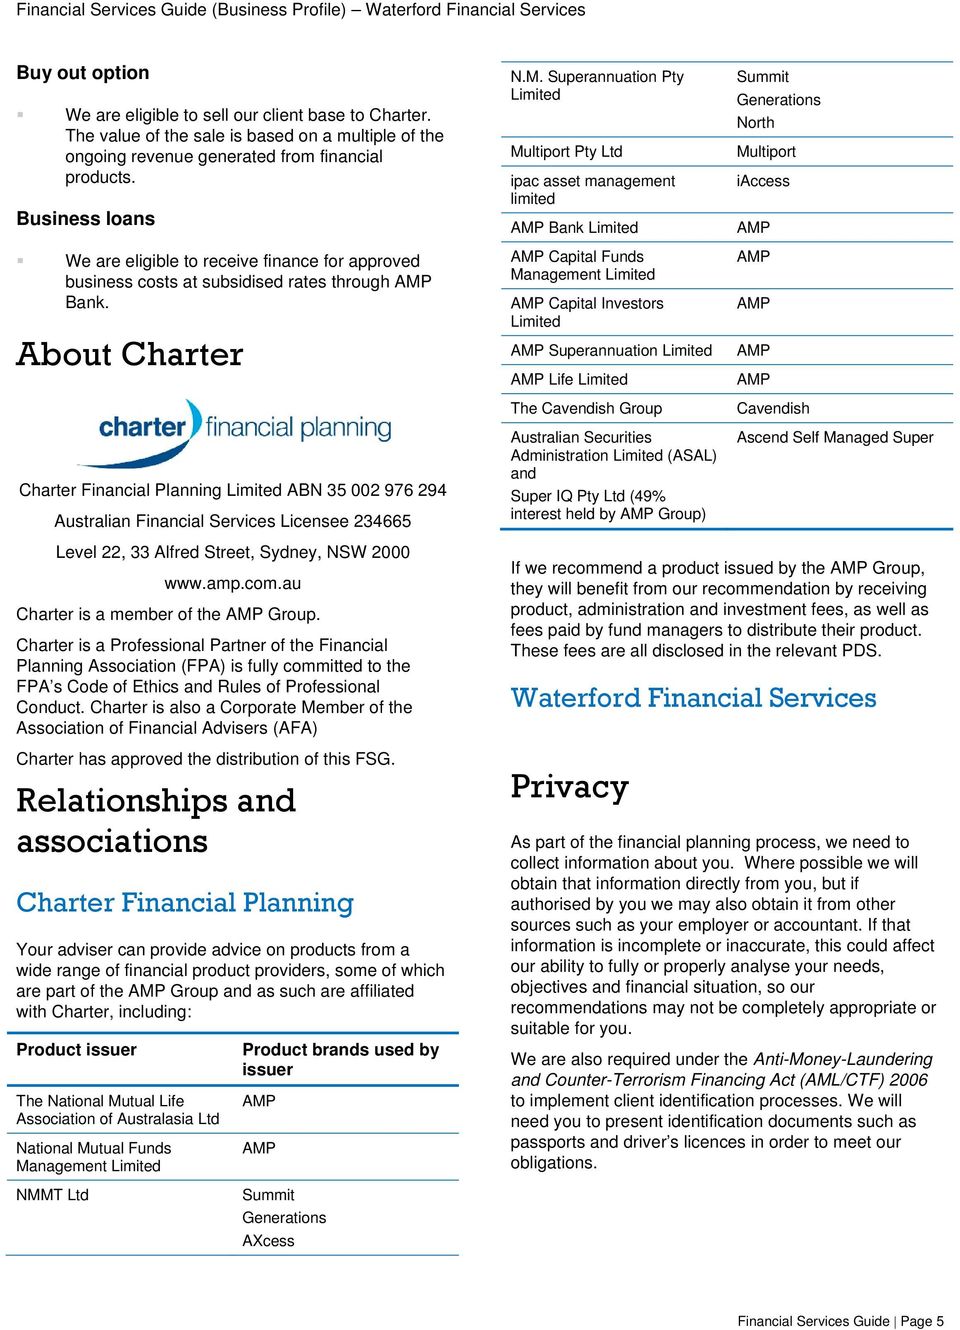 About Charter Charter Financial Planning Limited ABN 35 002 976 294 Australian Financial Services Licensee 234665 N.M.